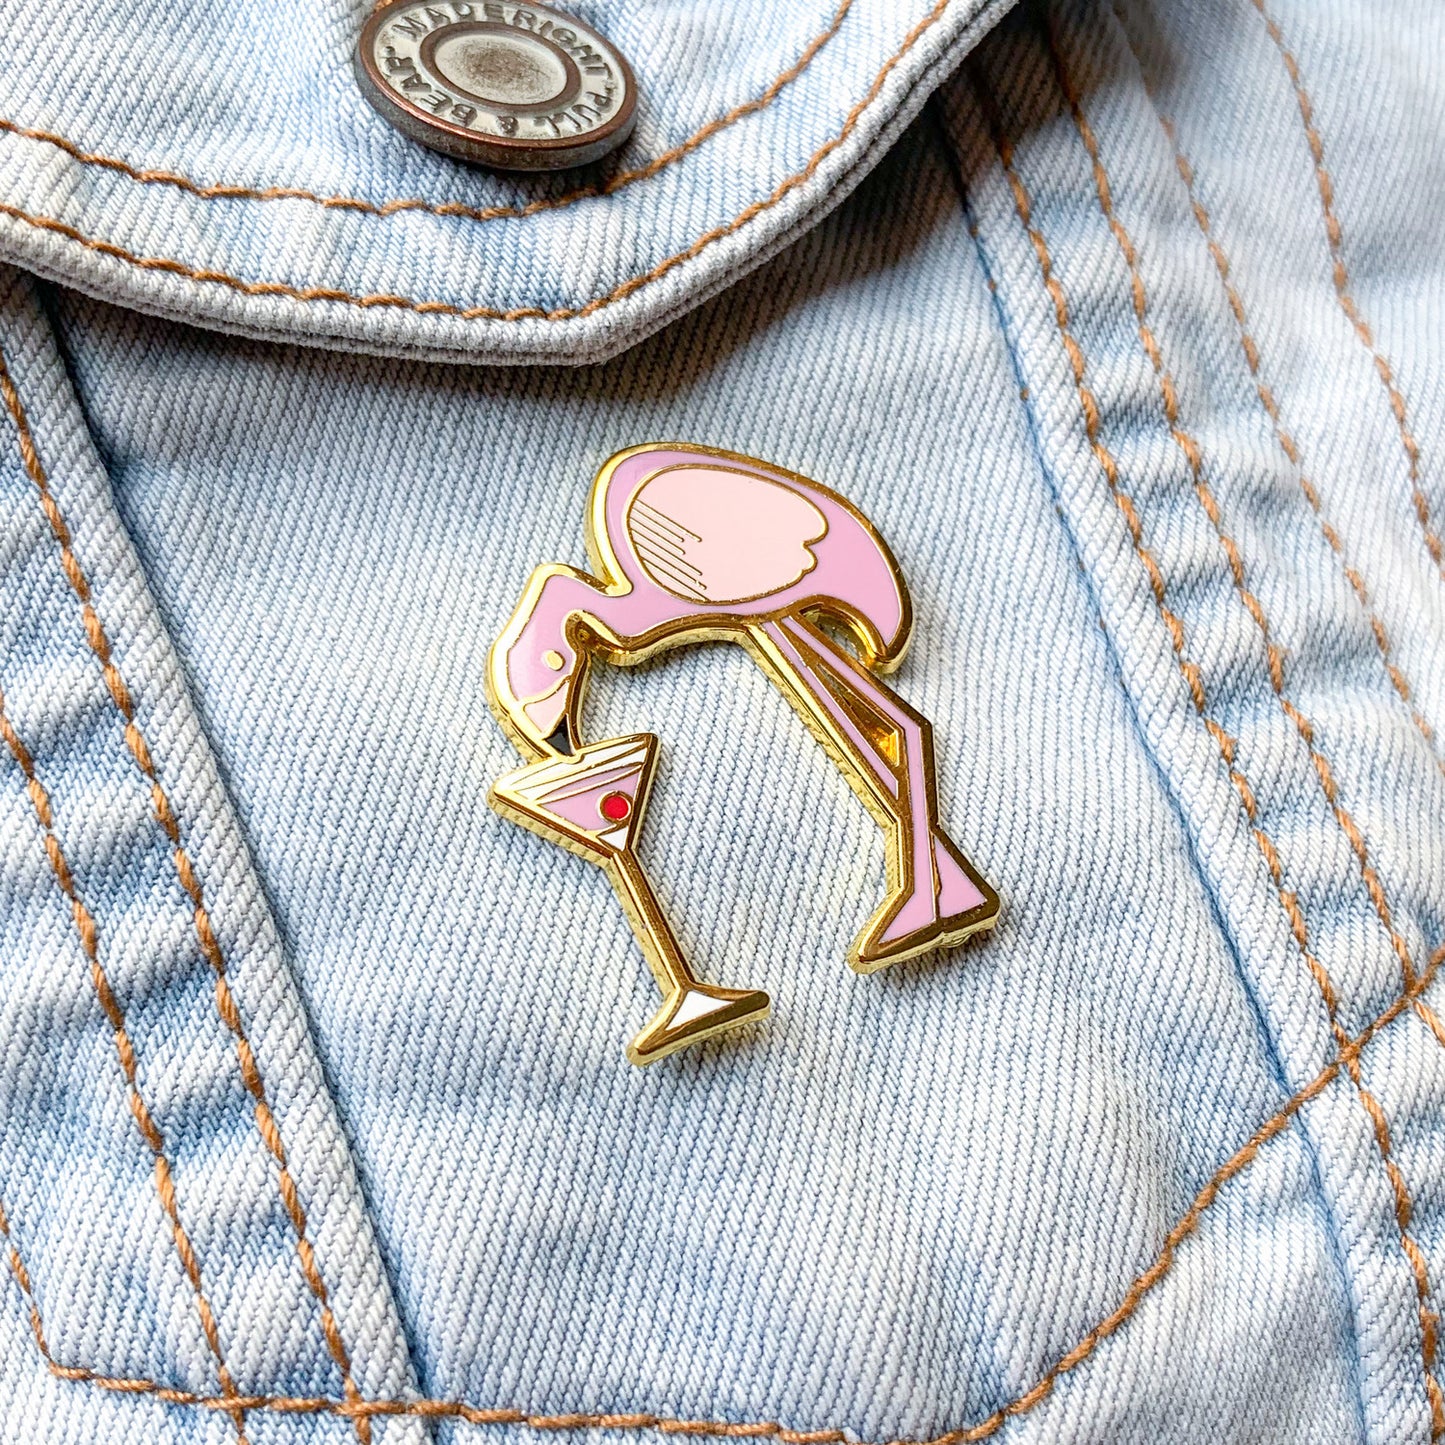 Flamingo and Cosmopolitan Cocktail Hard Enamel Pin by Cocktail Critters on Denim